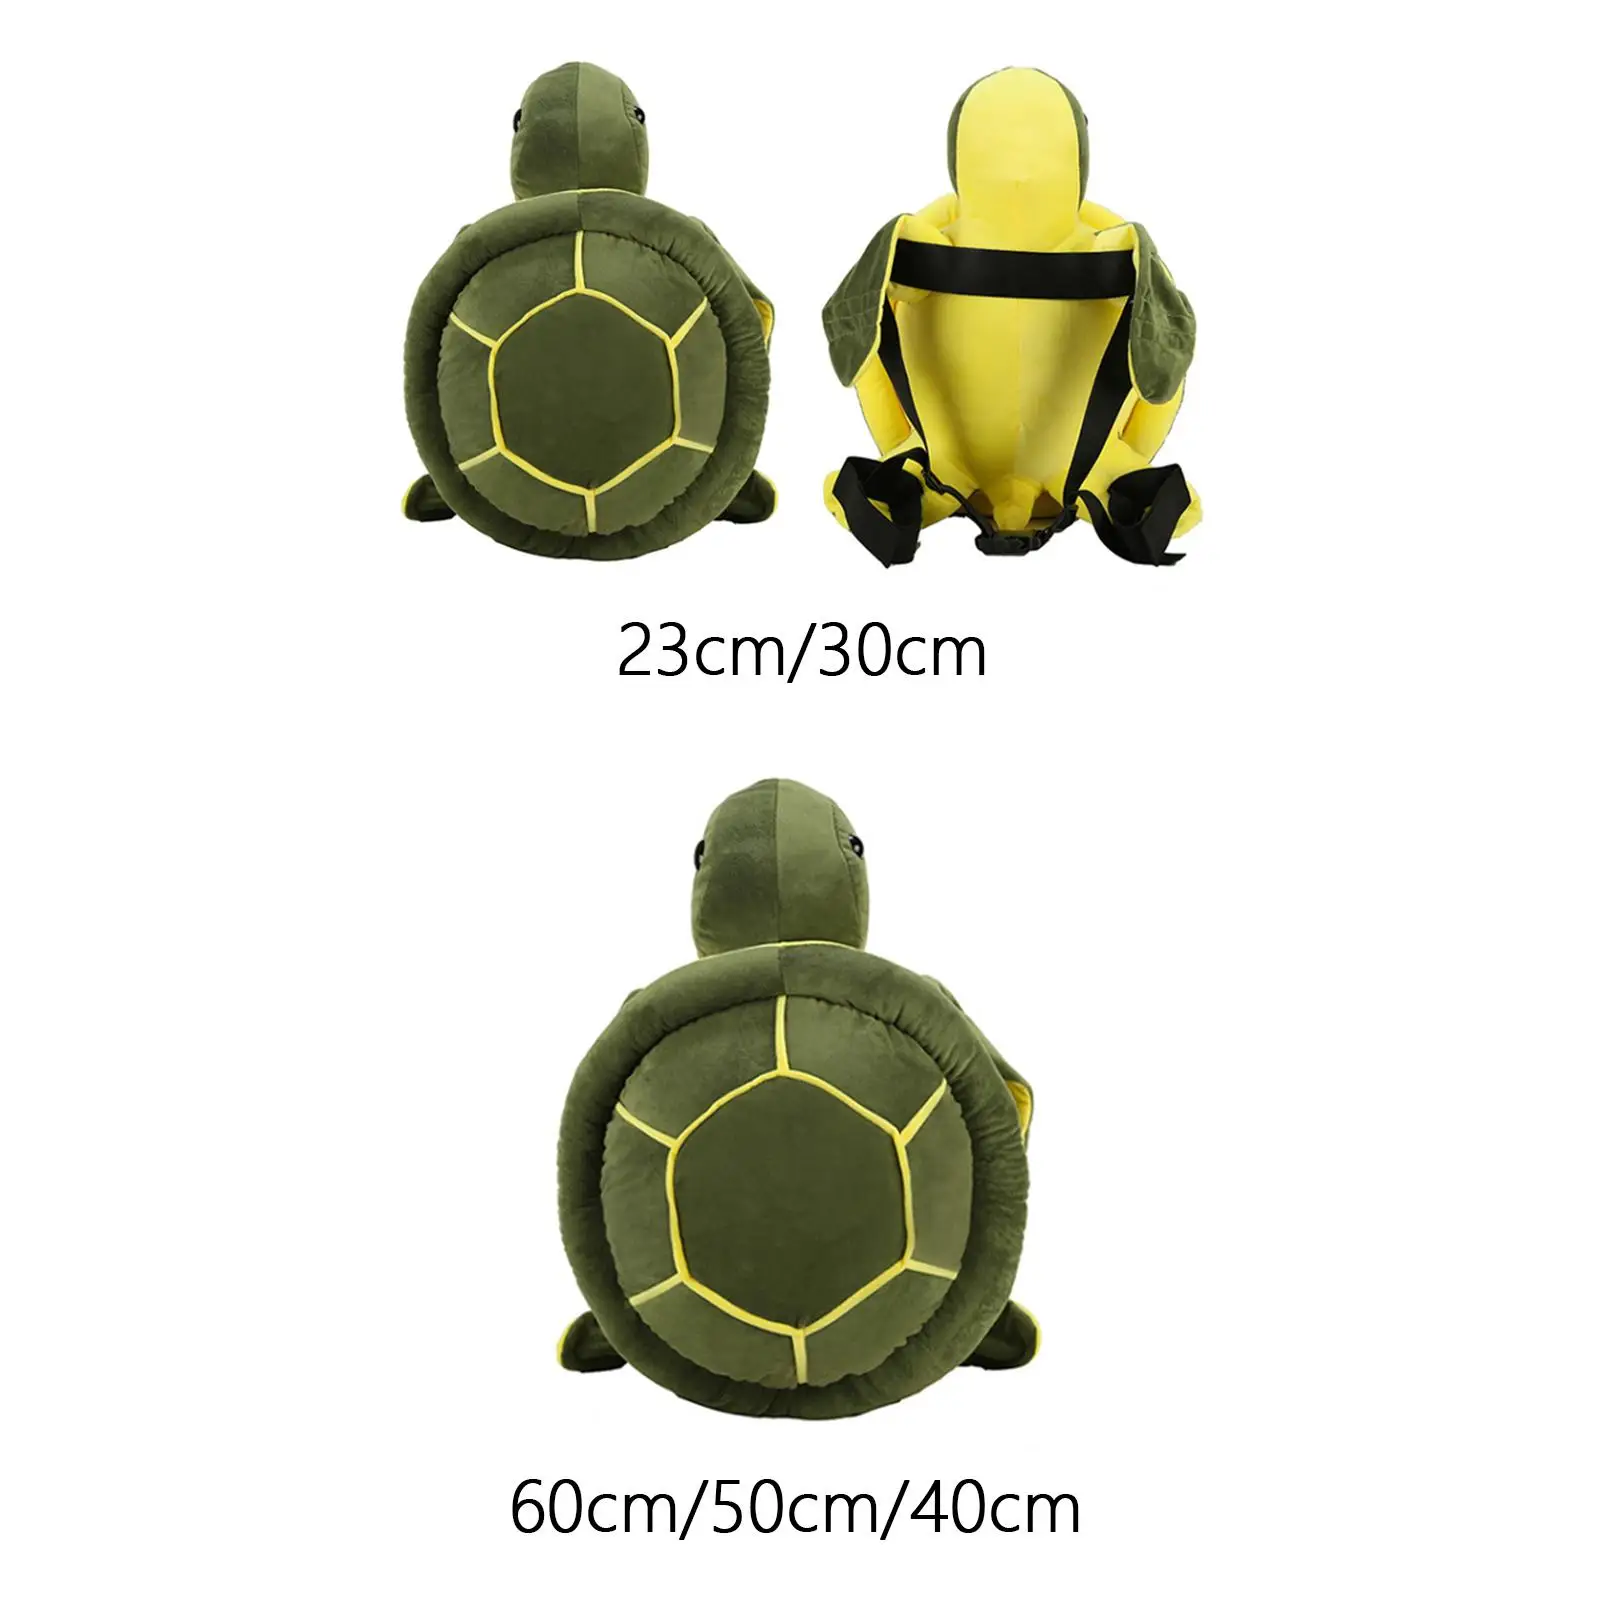 Plush Skiing Protector Gear Turtle Shape Protection Snowboarding Activities